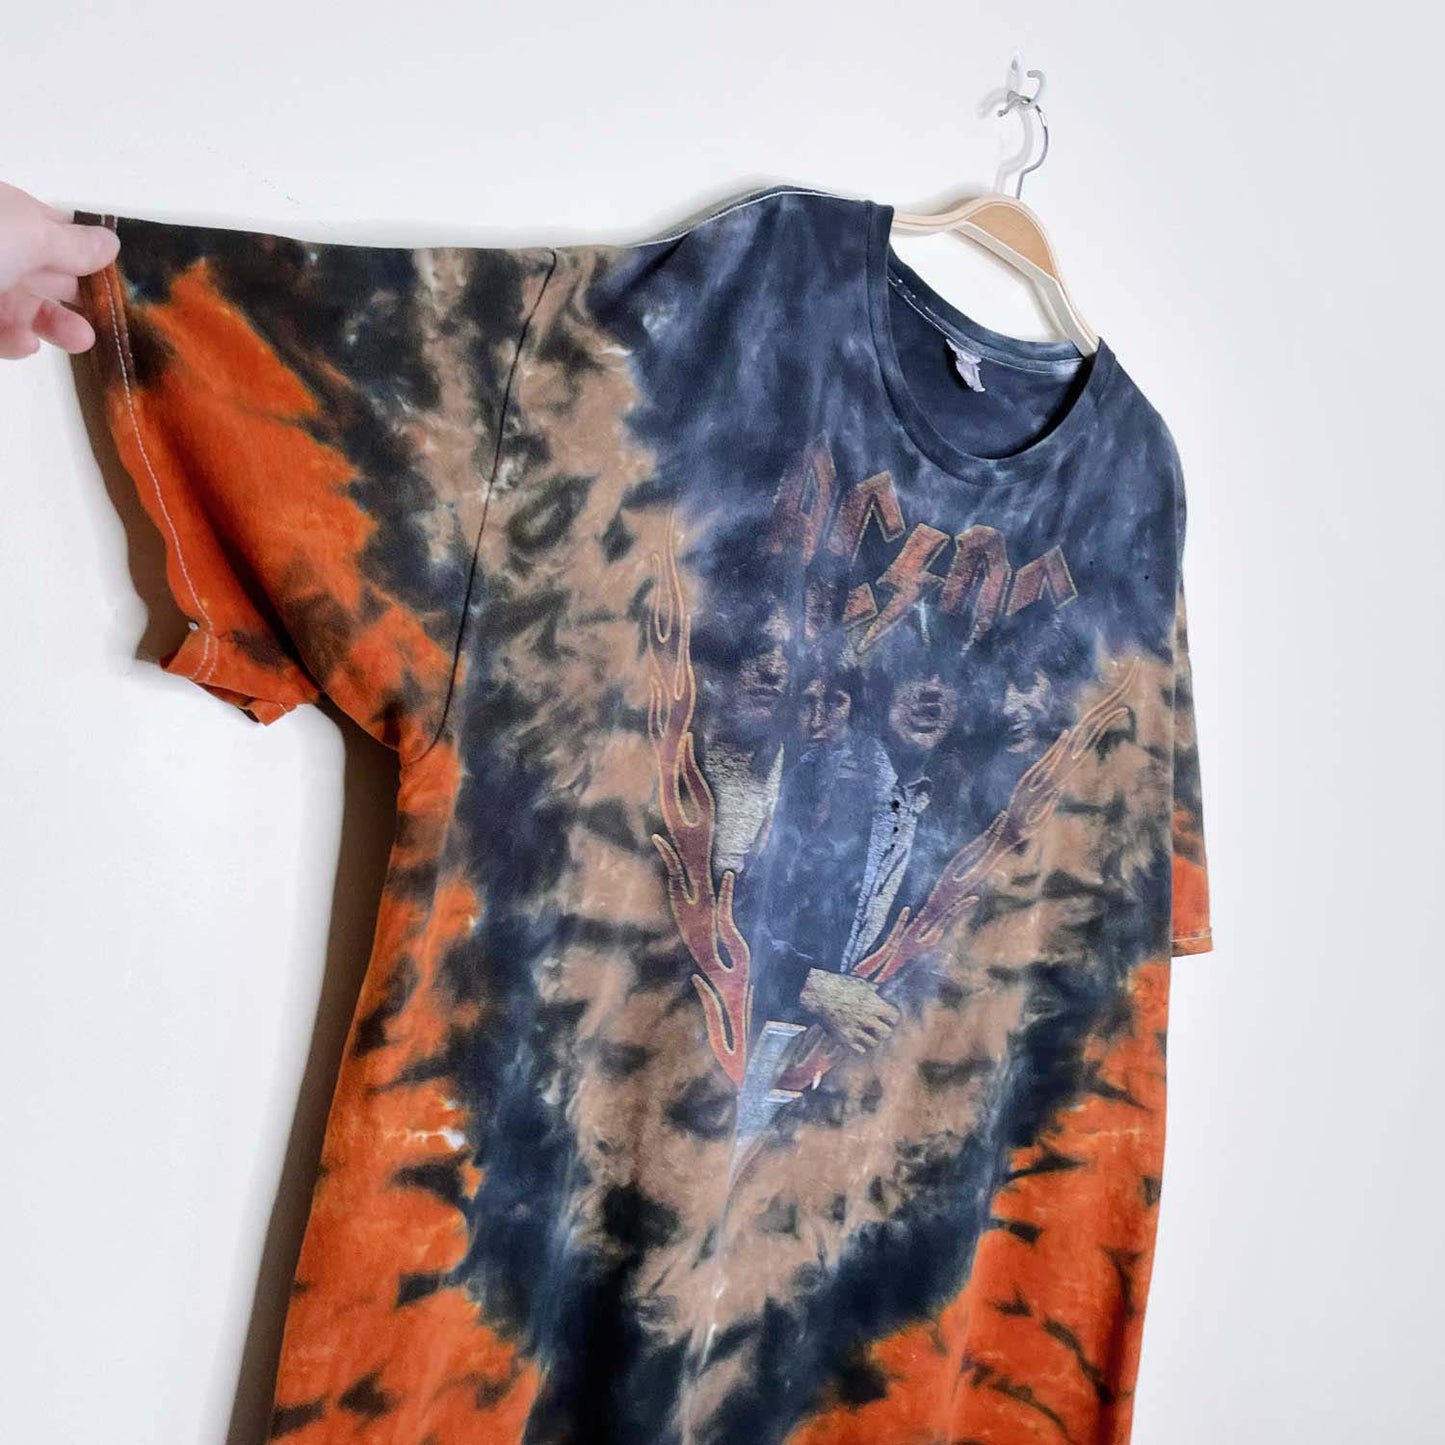 acdc 2004 back in black tie dye band tee - size 3xl